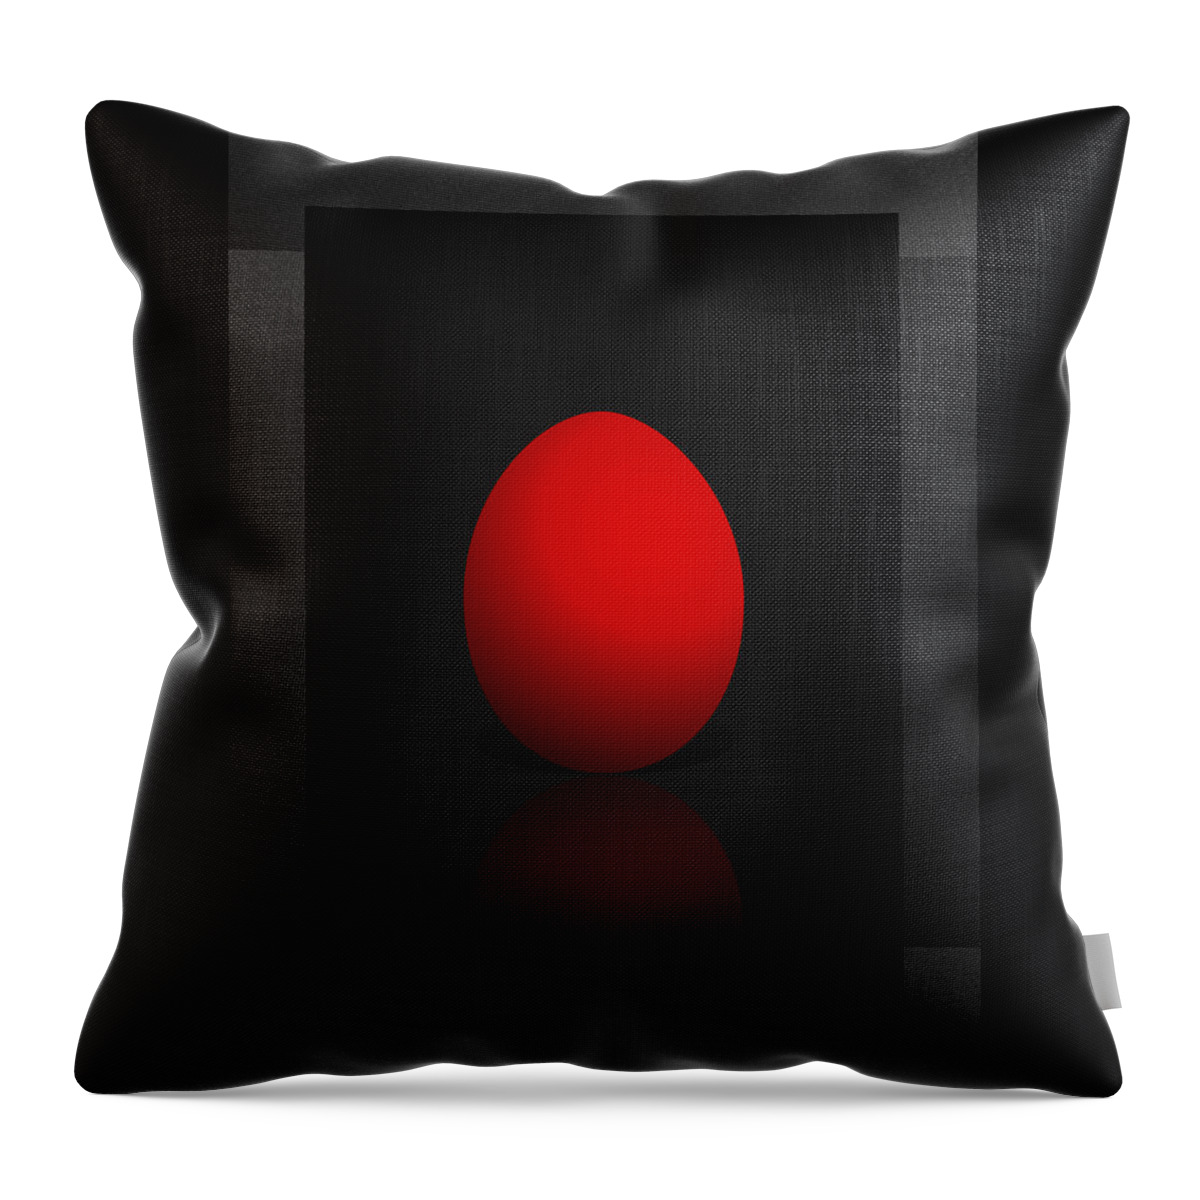 �red On Black� Collection By Serge Averbukh Throw Pillow featuring the photograph Red Egg on Black Canvas by Serge Averbukh